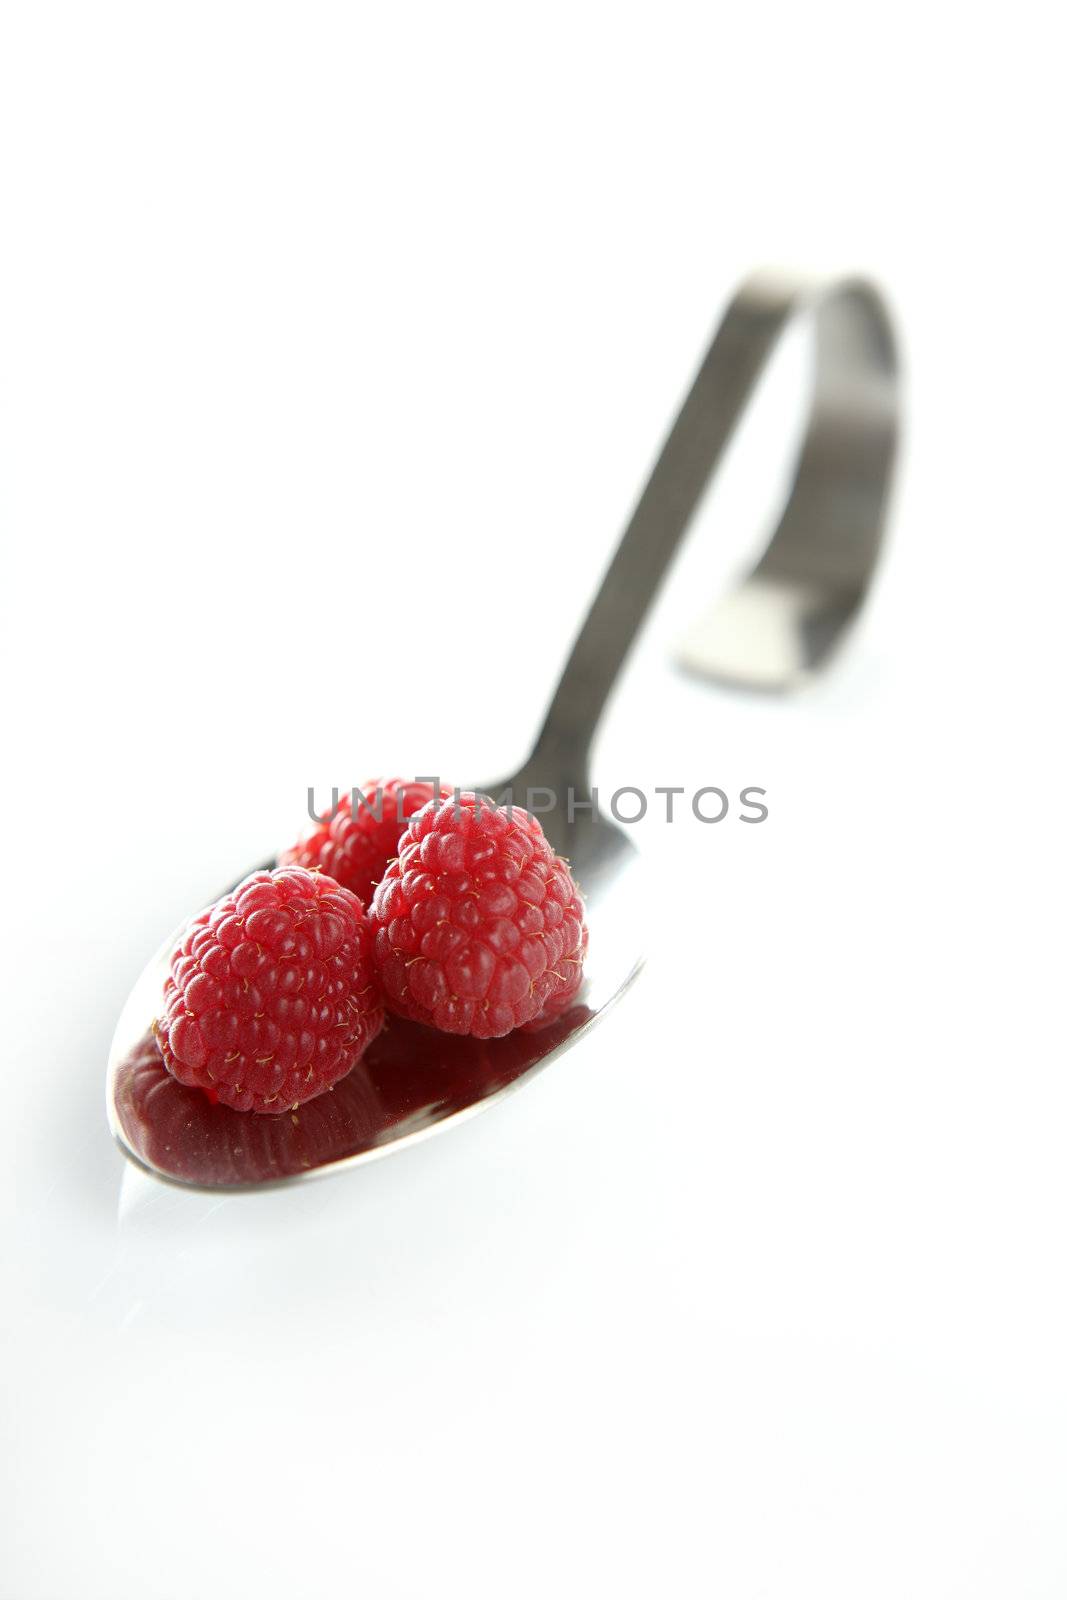 Raspberries in a curved spoon in white background